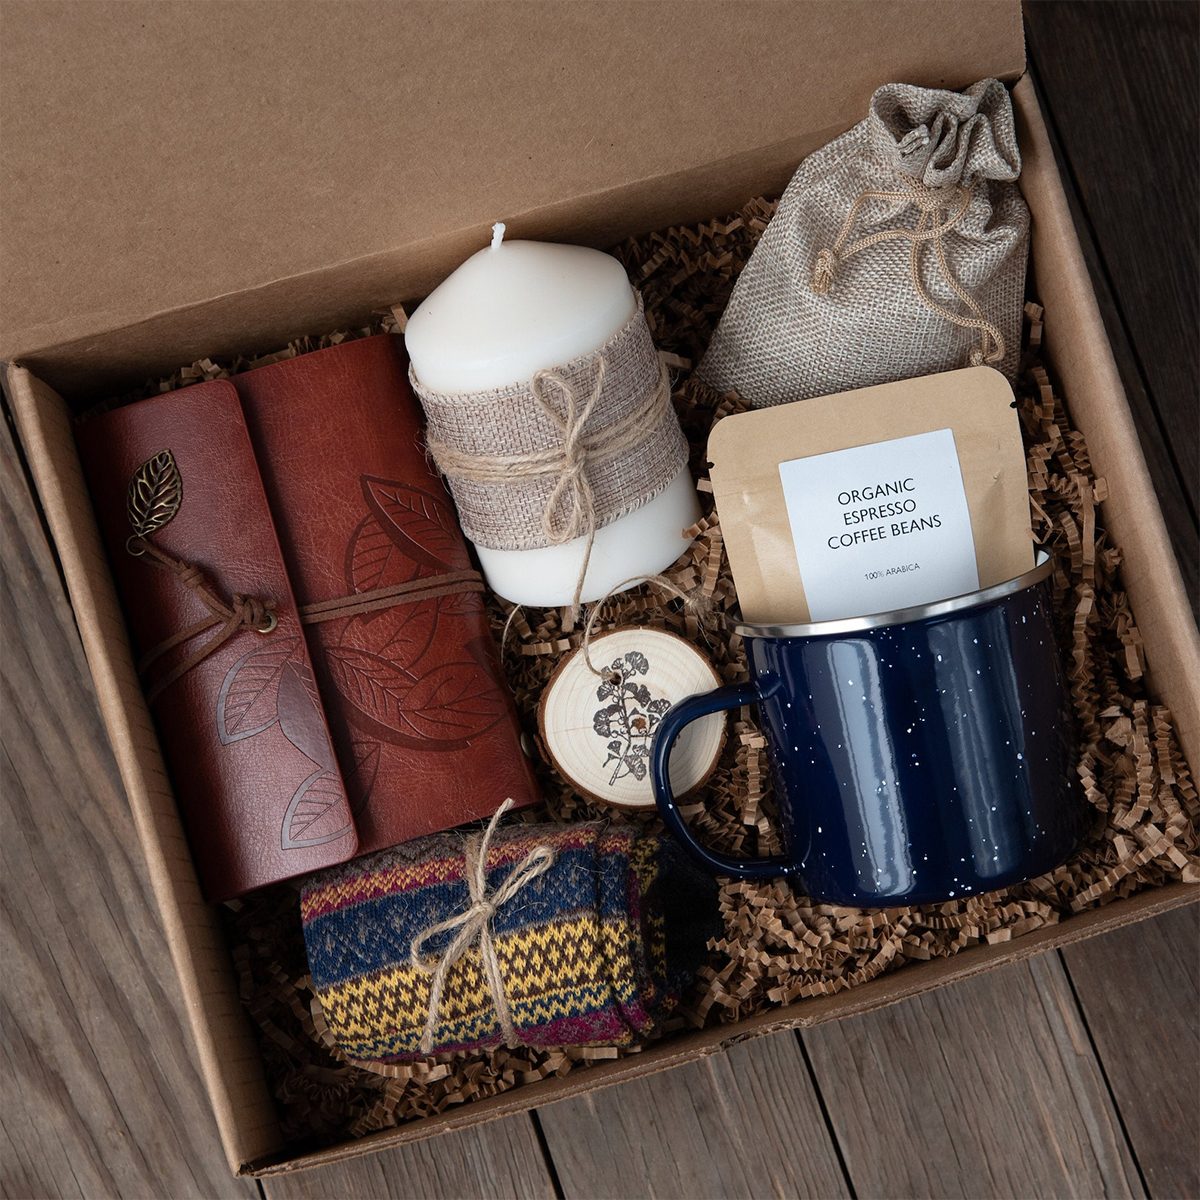 Gift Guide  Homebody & Chef - A Thoughtful Place